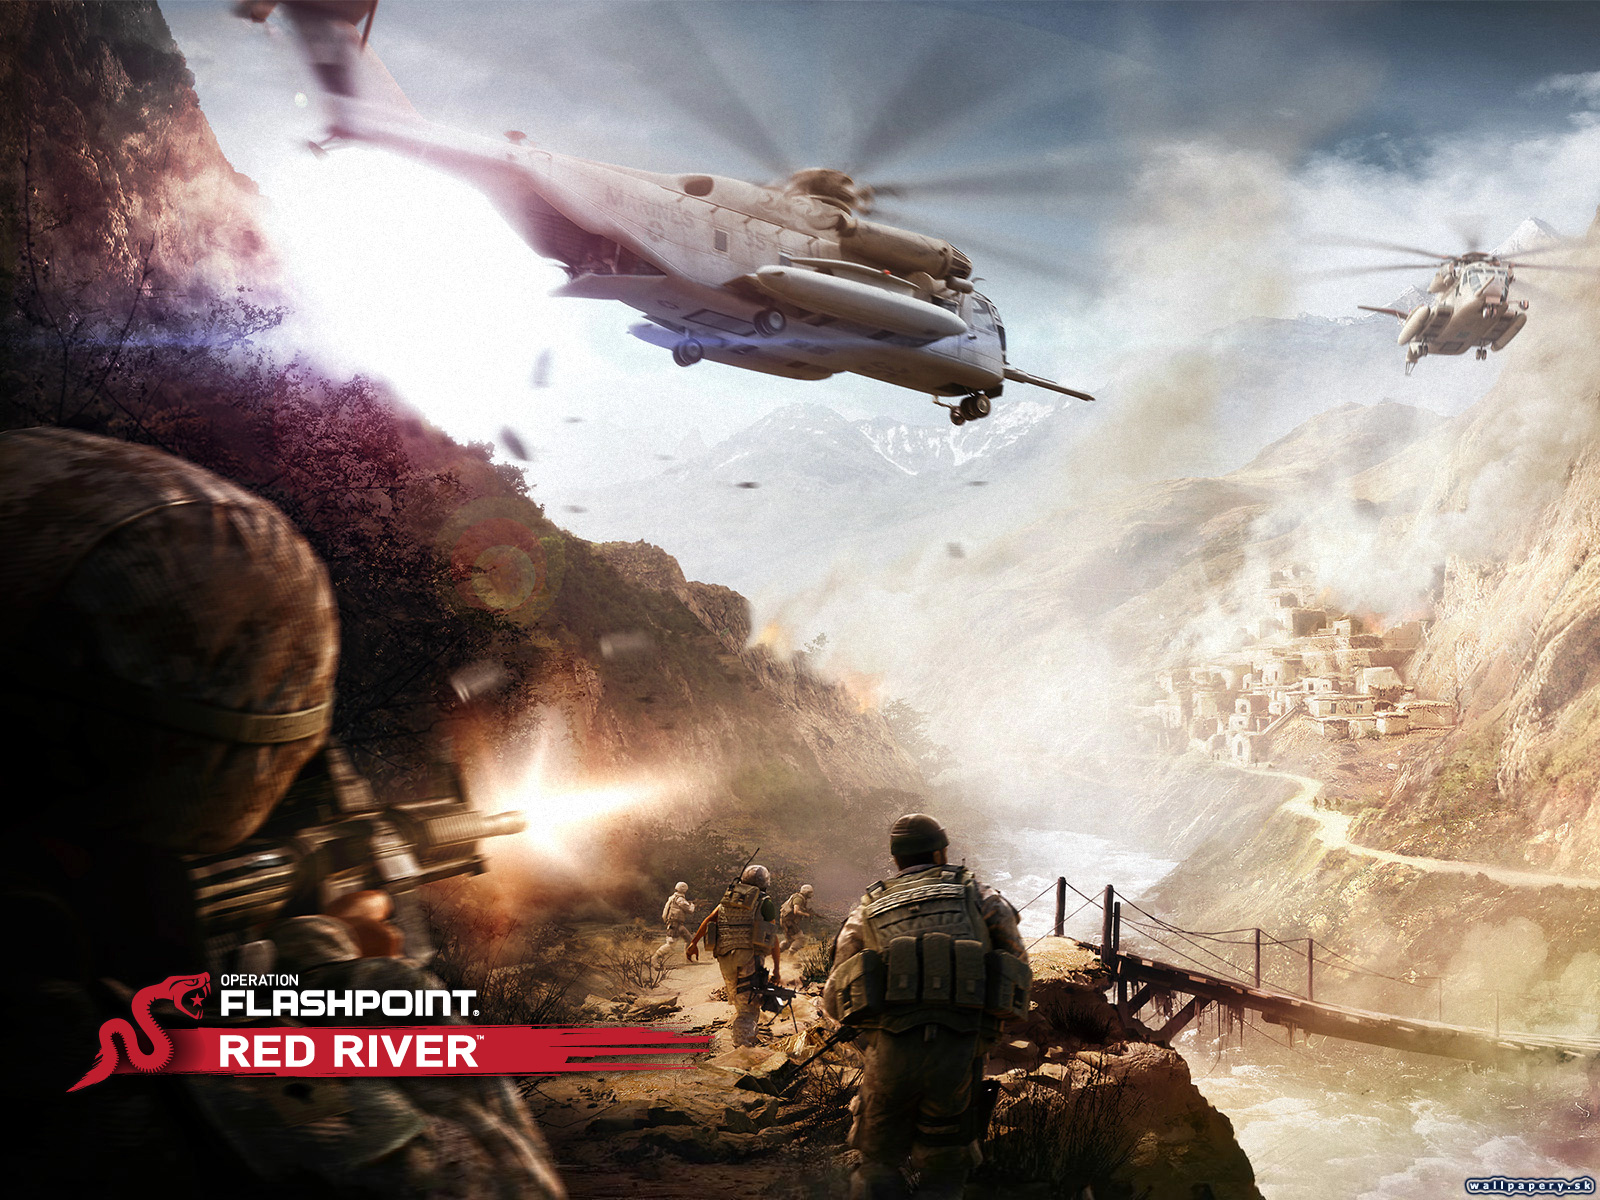 Operation Flashpoint: Red River - wallpaper 11